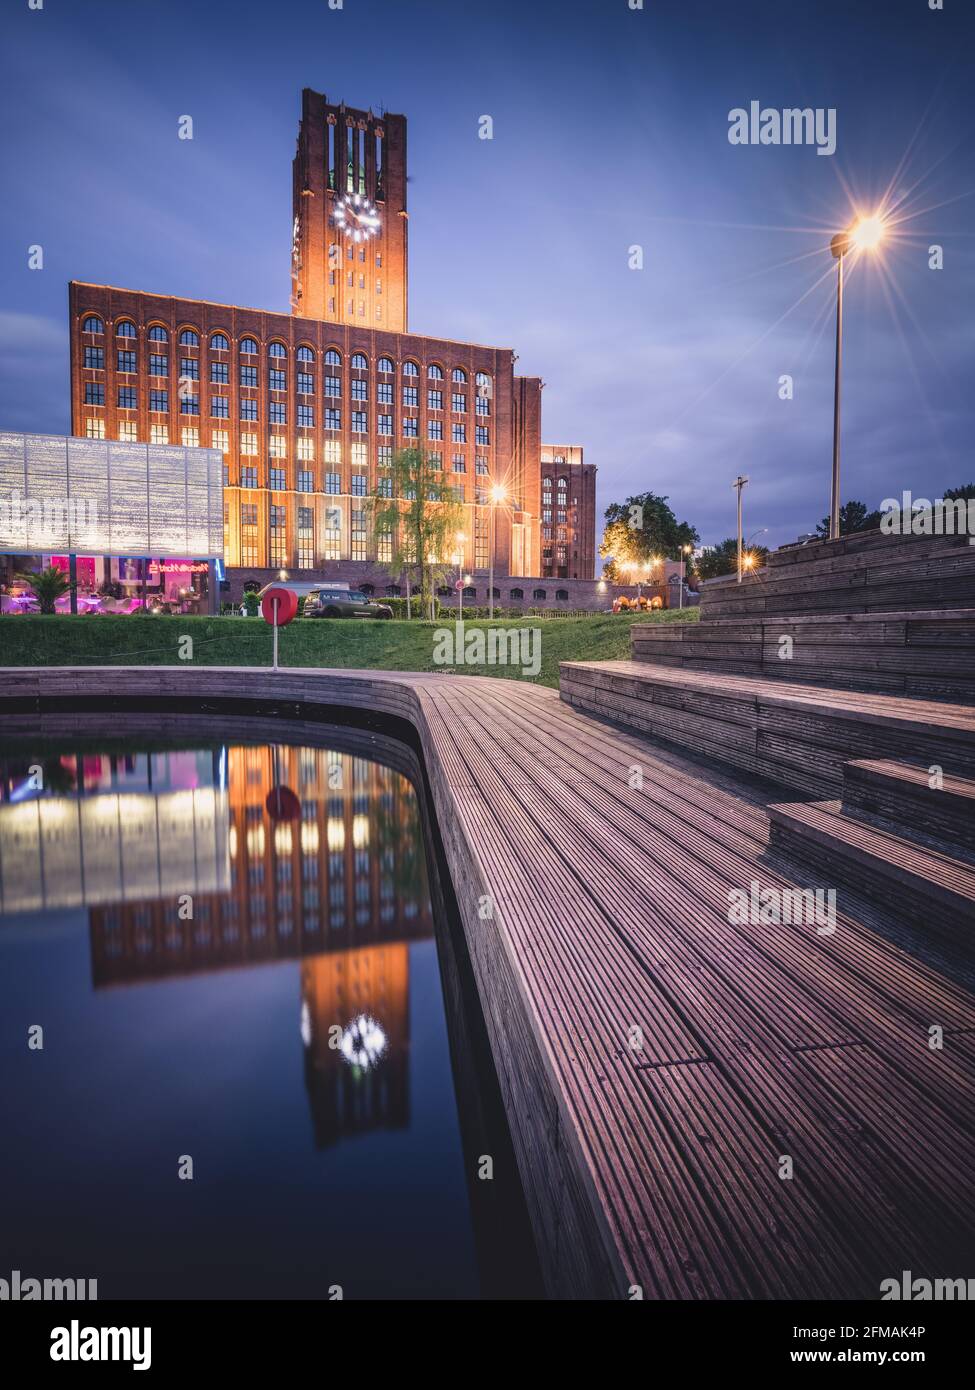 Blue hour at the illuminated Ullsteinhaus in Berlin with reflection in the Tempelhof harbor. Stock Photo